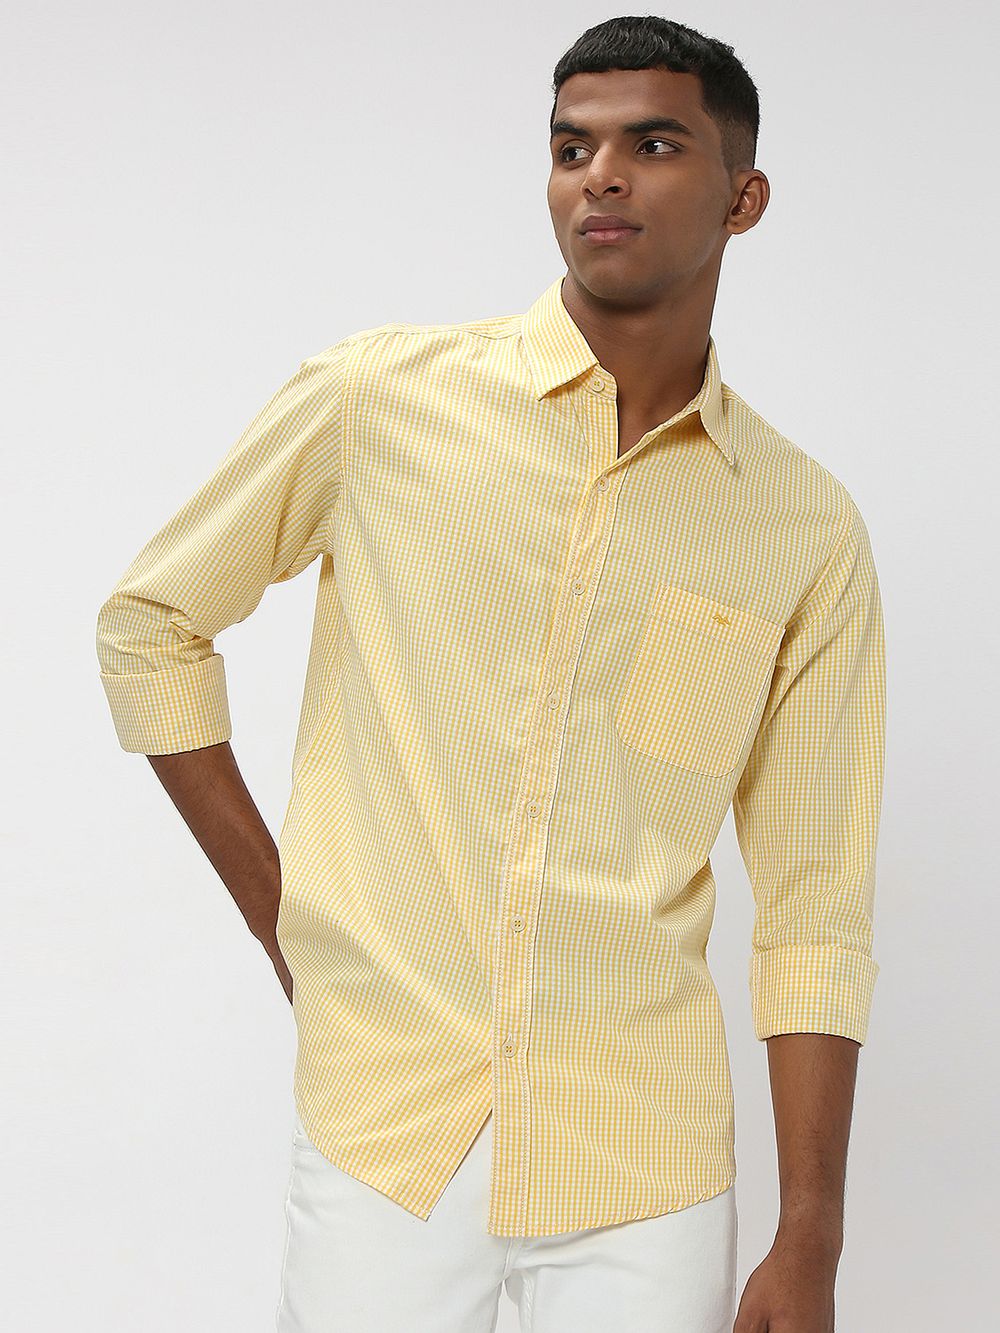 Yellow & White Gingham Check Slim Fit Casual Shirt